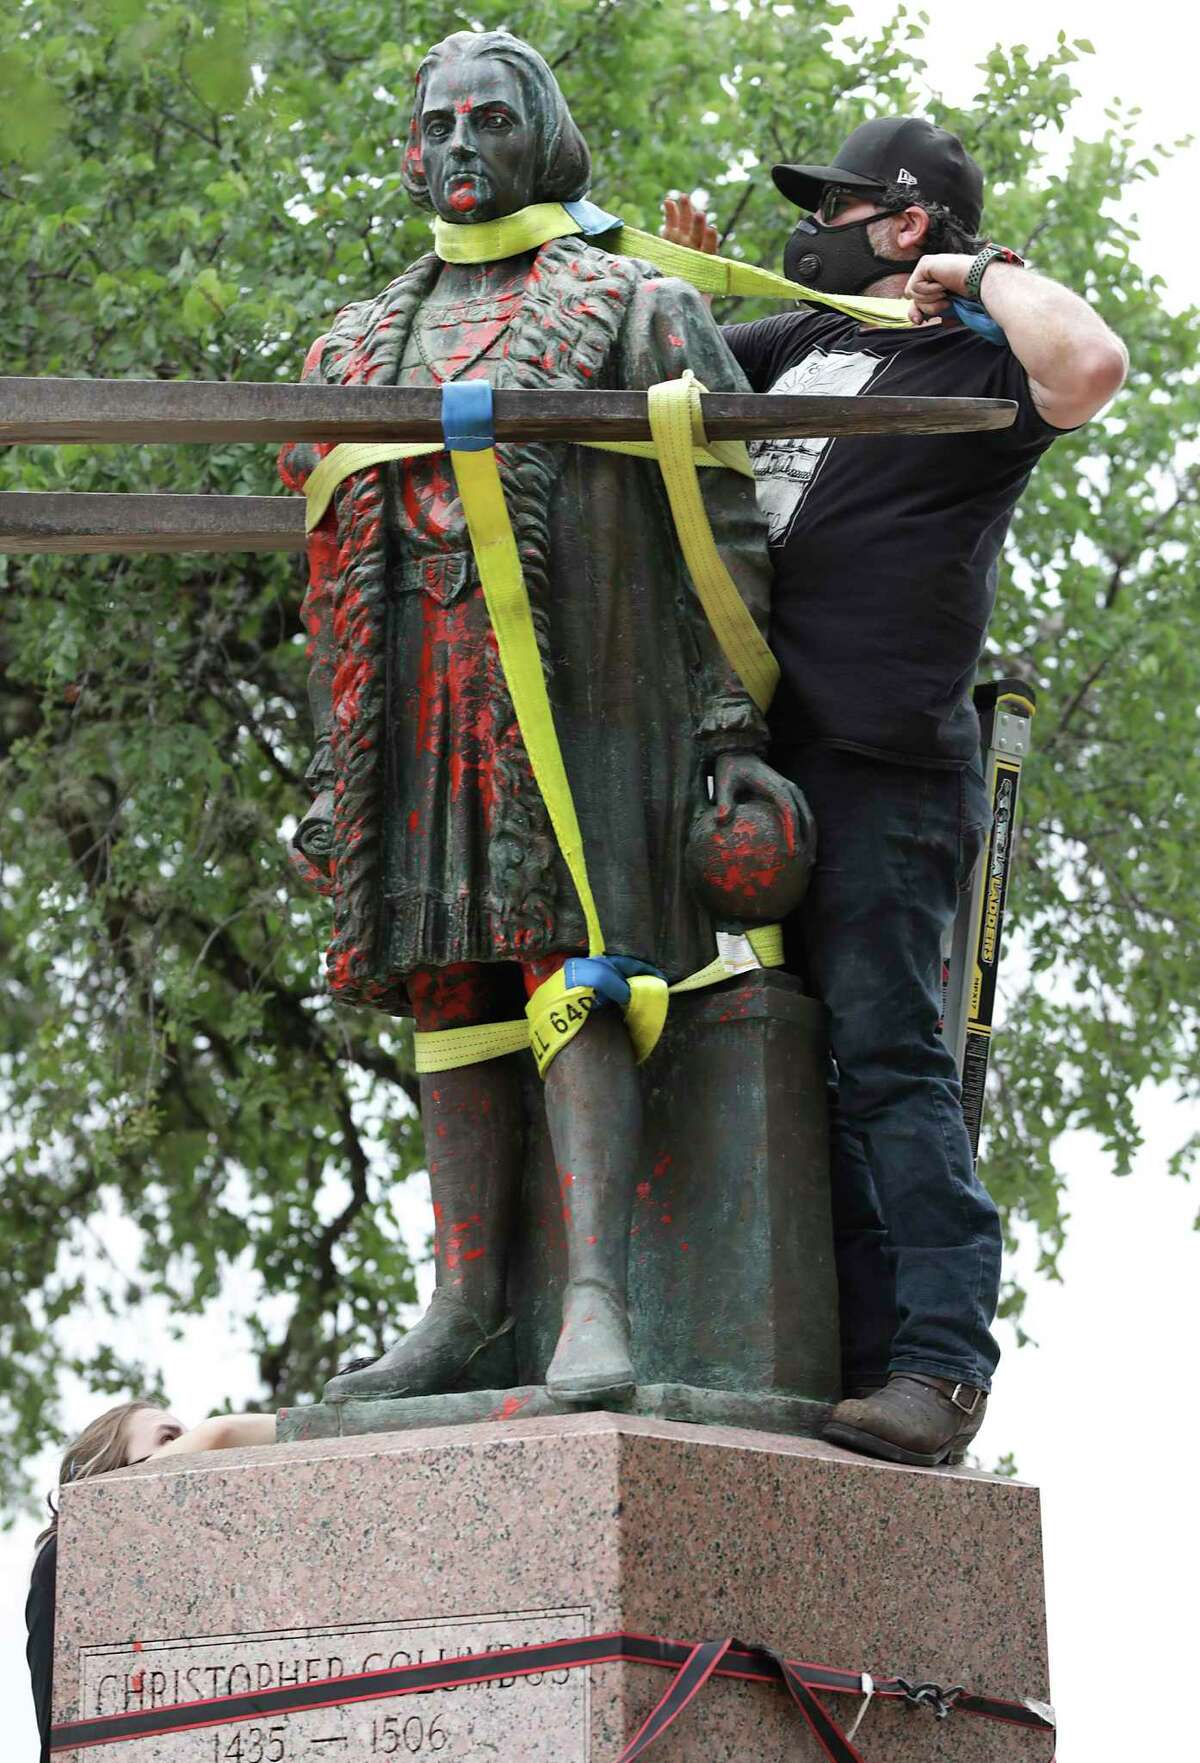 The Columbus statue, in place since 1957, was affixed to the pedestal with bolts that have since rusted out.